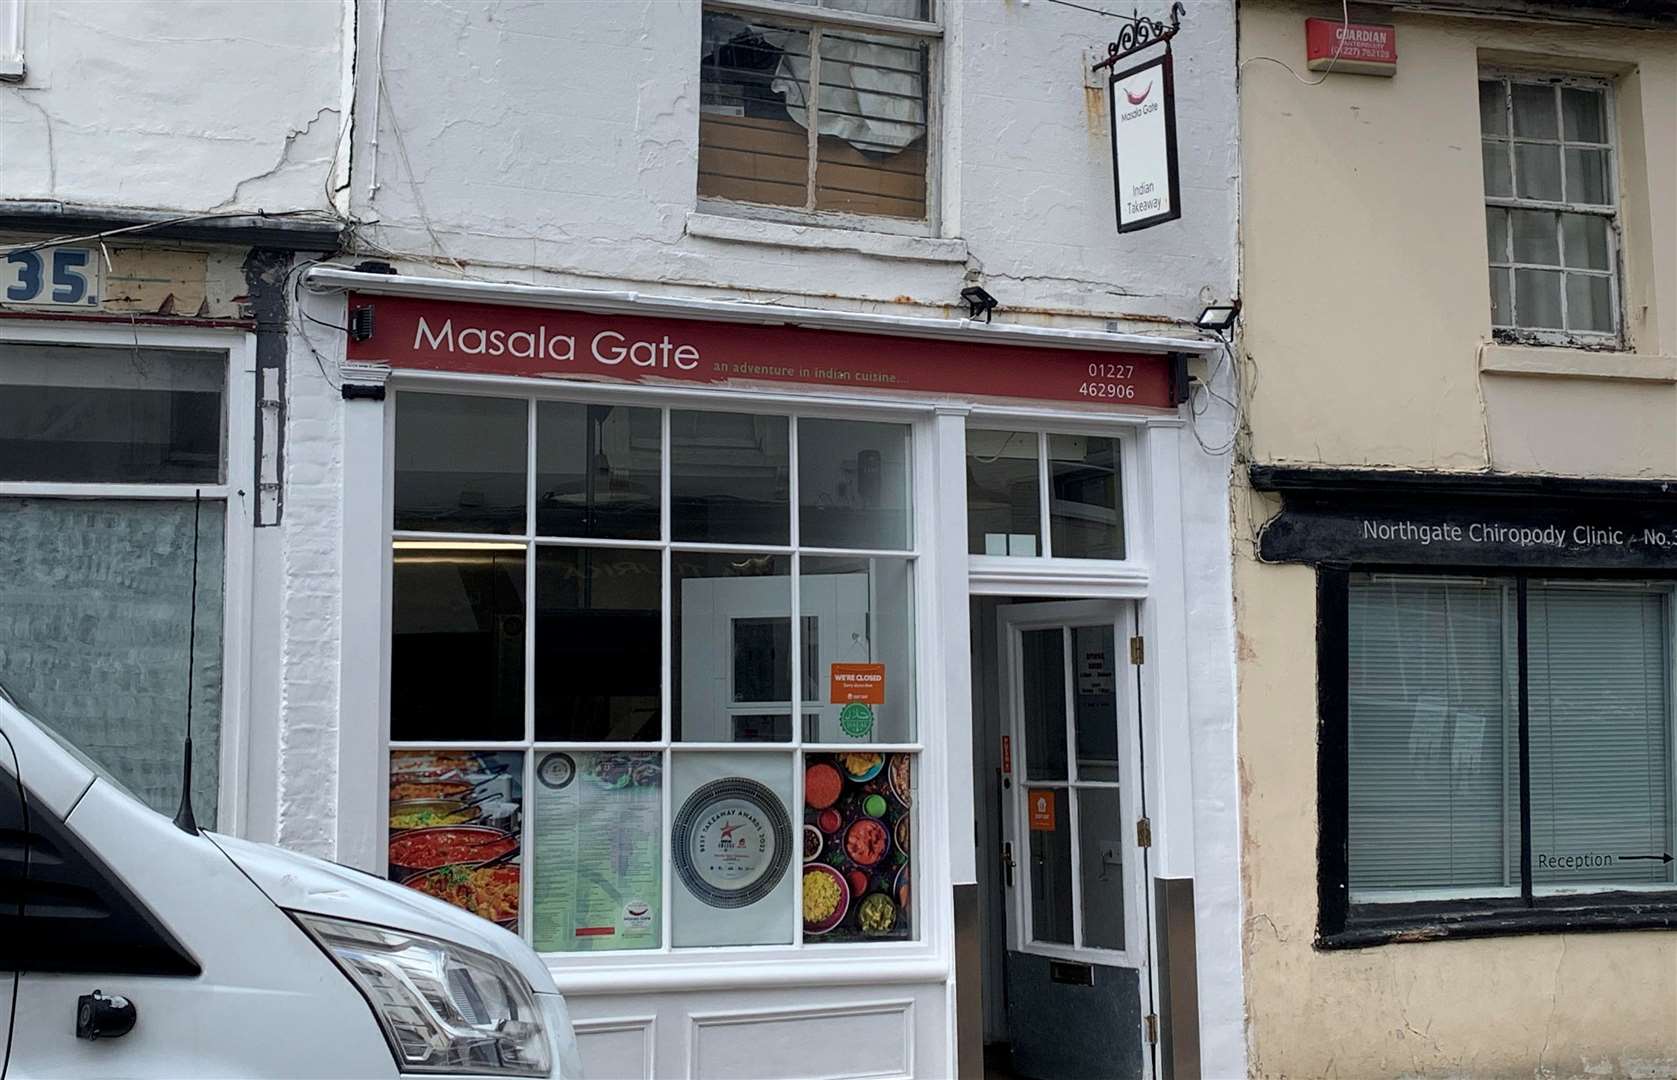 Masala Gate takeaway in Canterbury was fined for having no smoke alarms